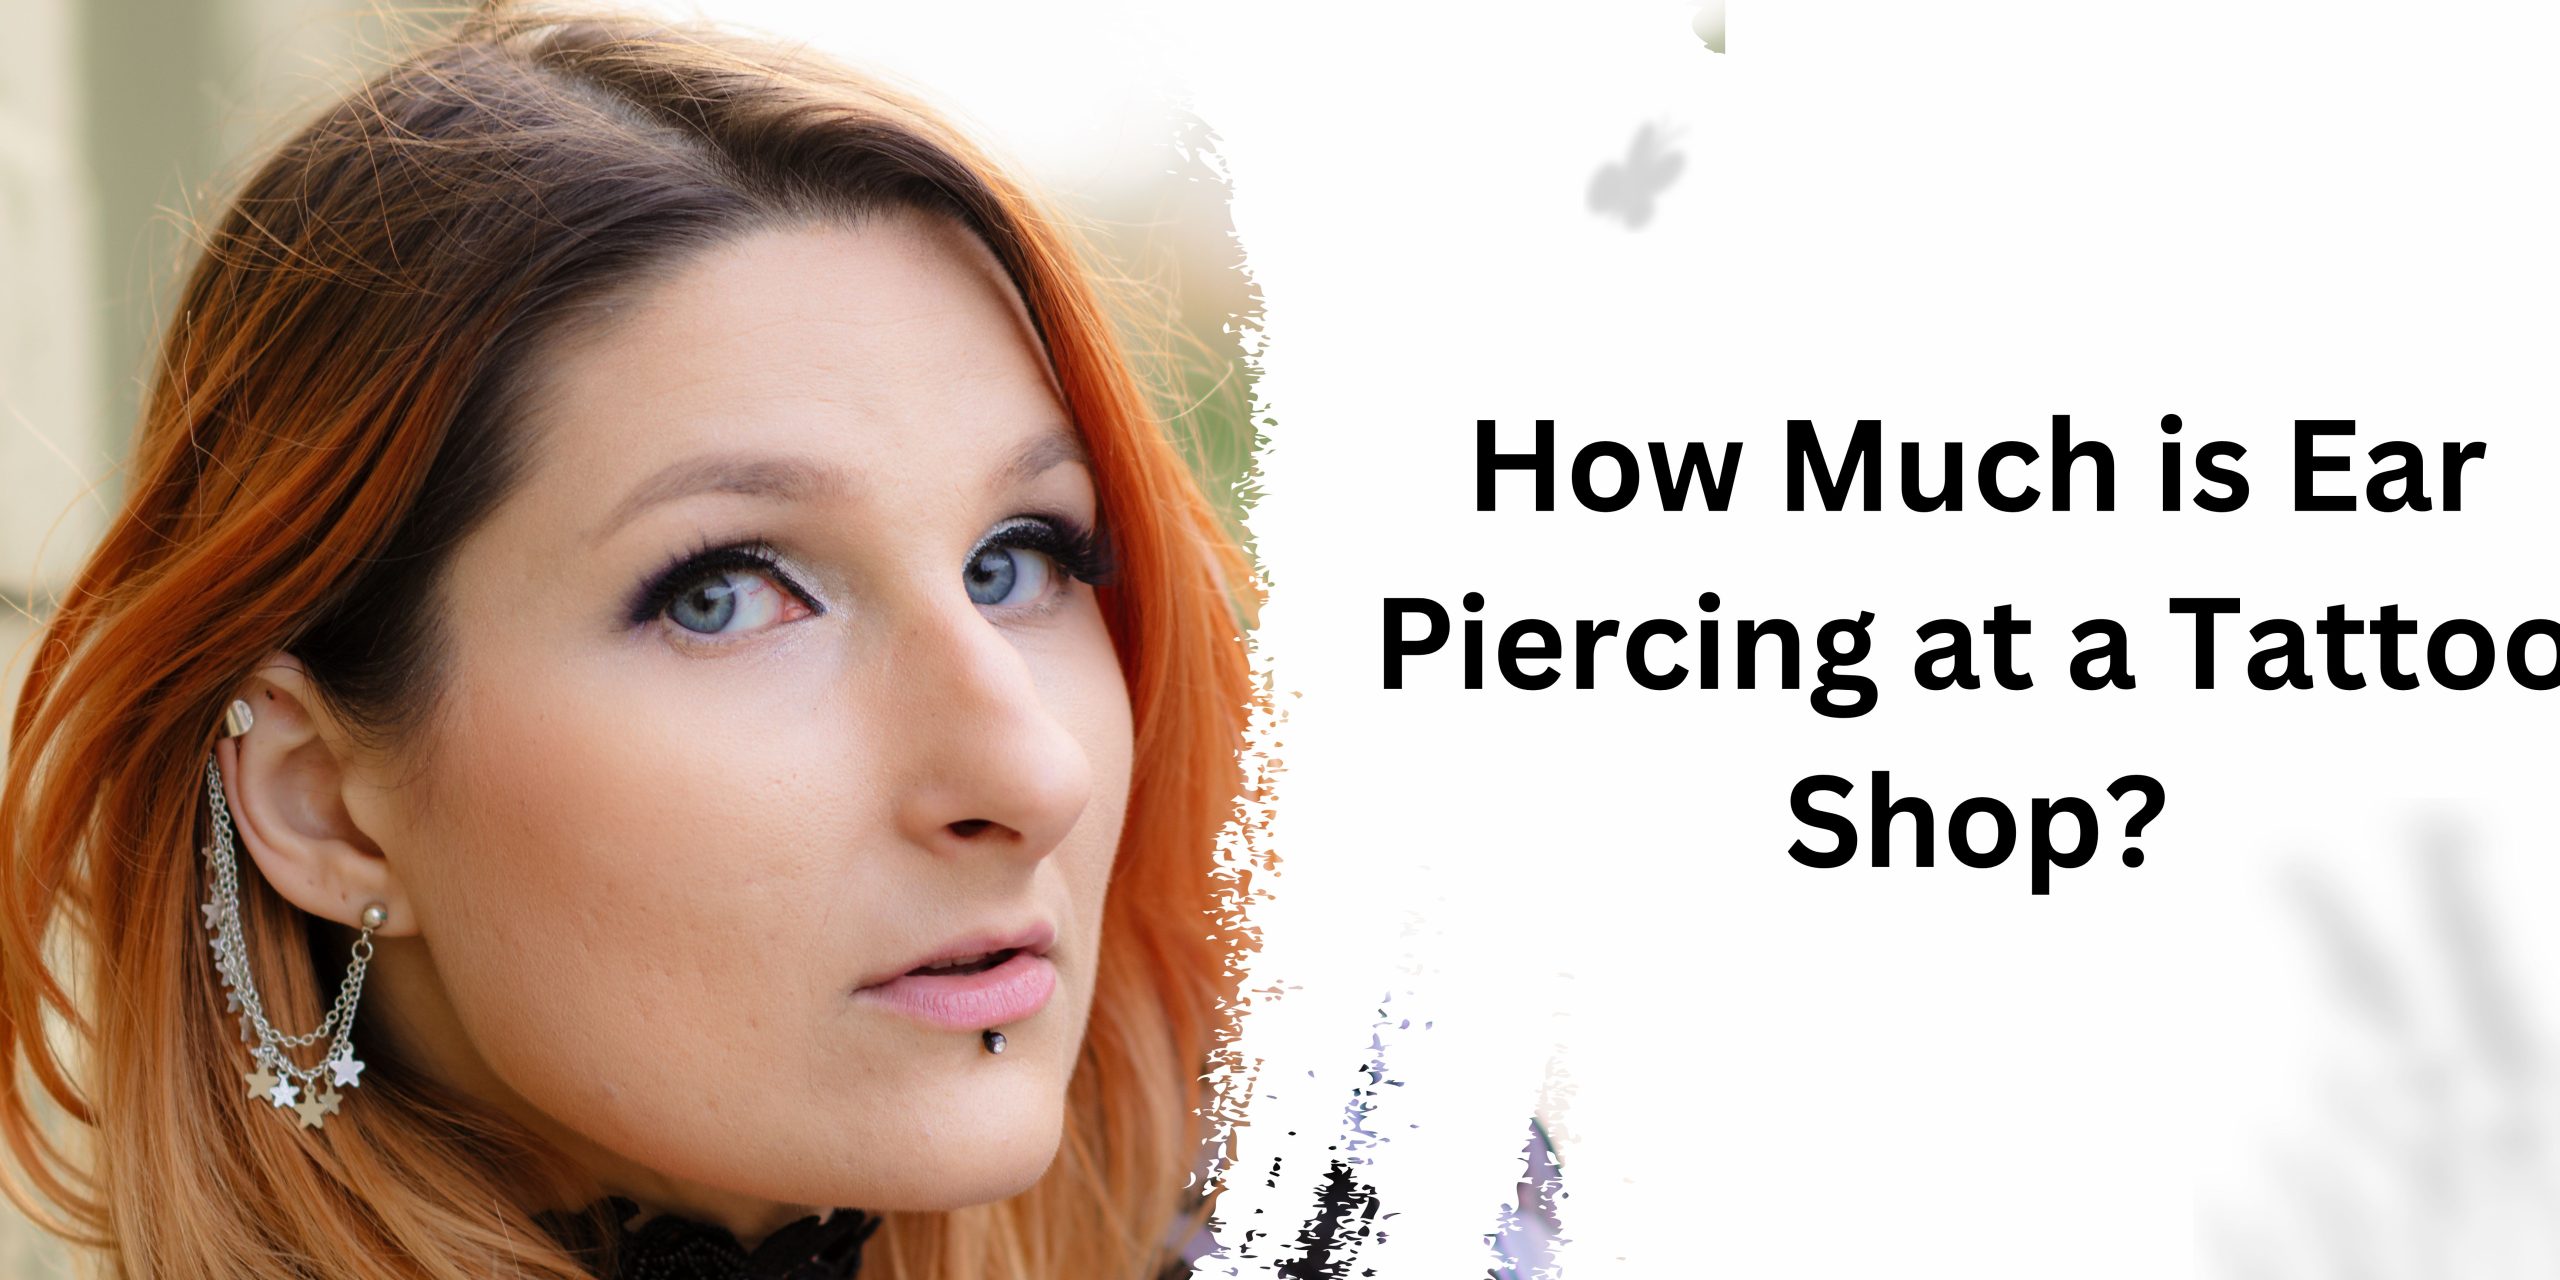 How Much is Ear Piercing at a Tattoo Shop